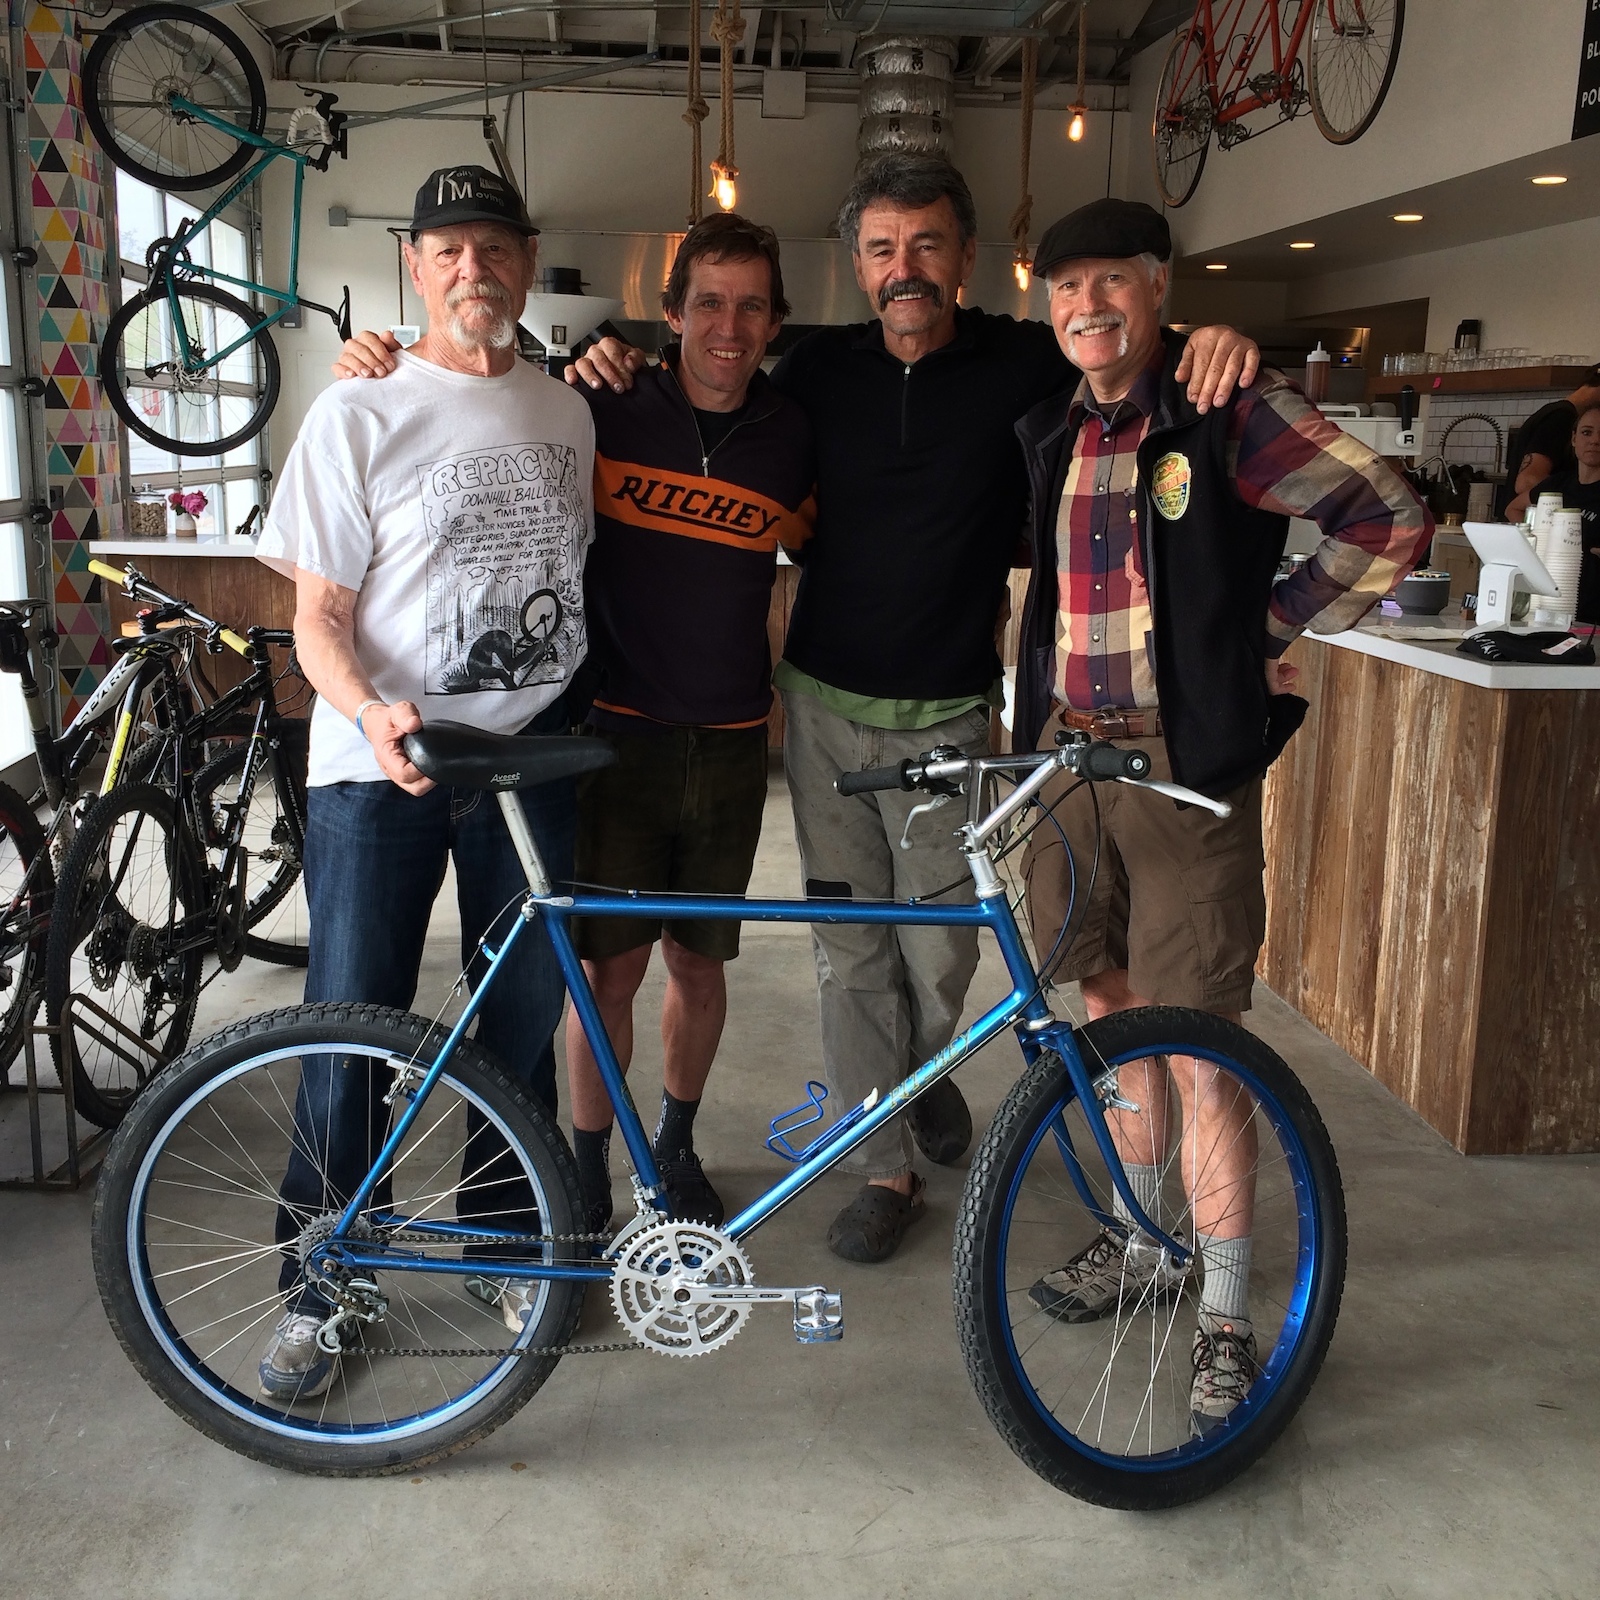 Ritchey MountainBike #4, owned by Thomas Frischknecht, shown at Captain and Stoker coffee house in Monterey